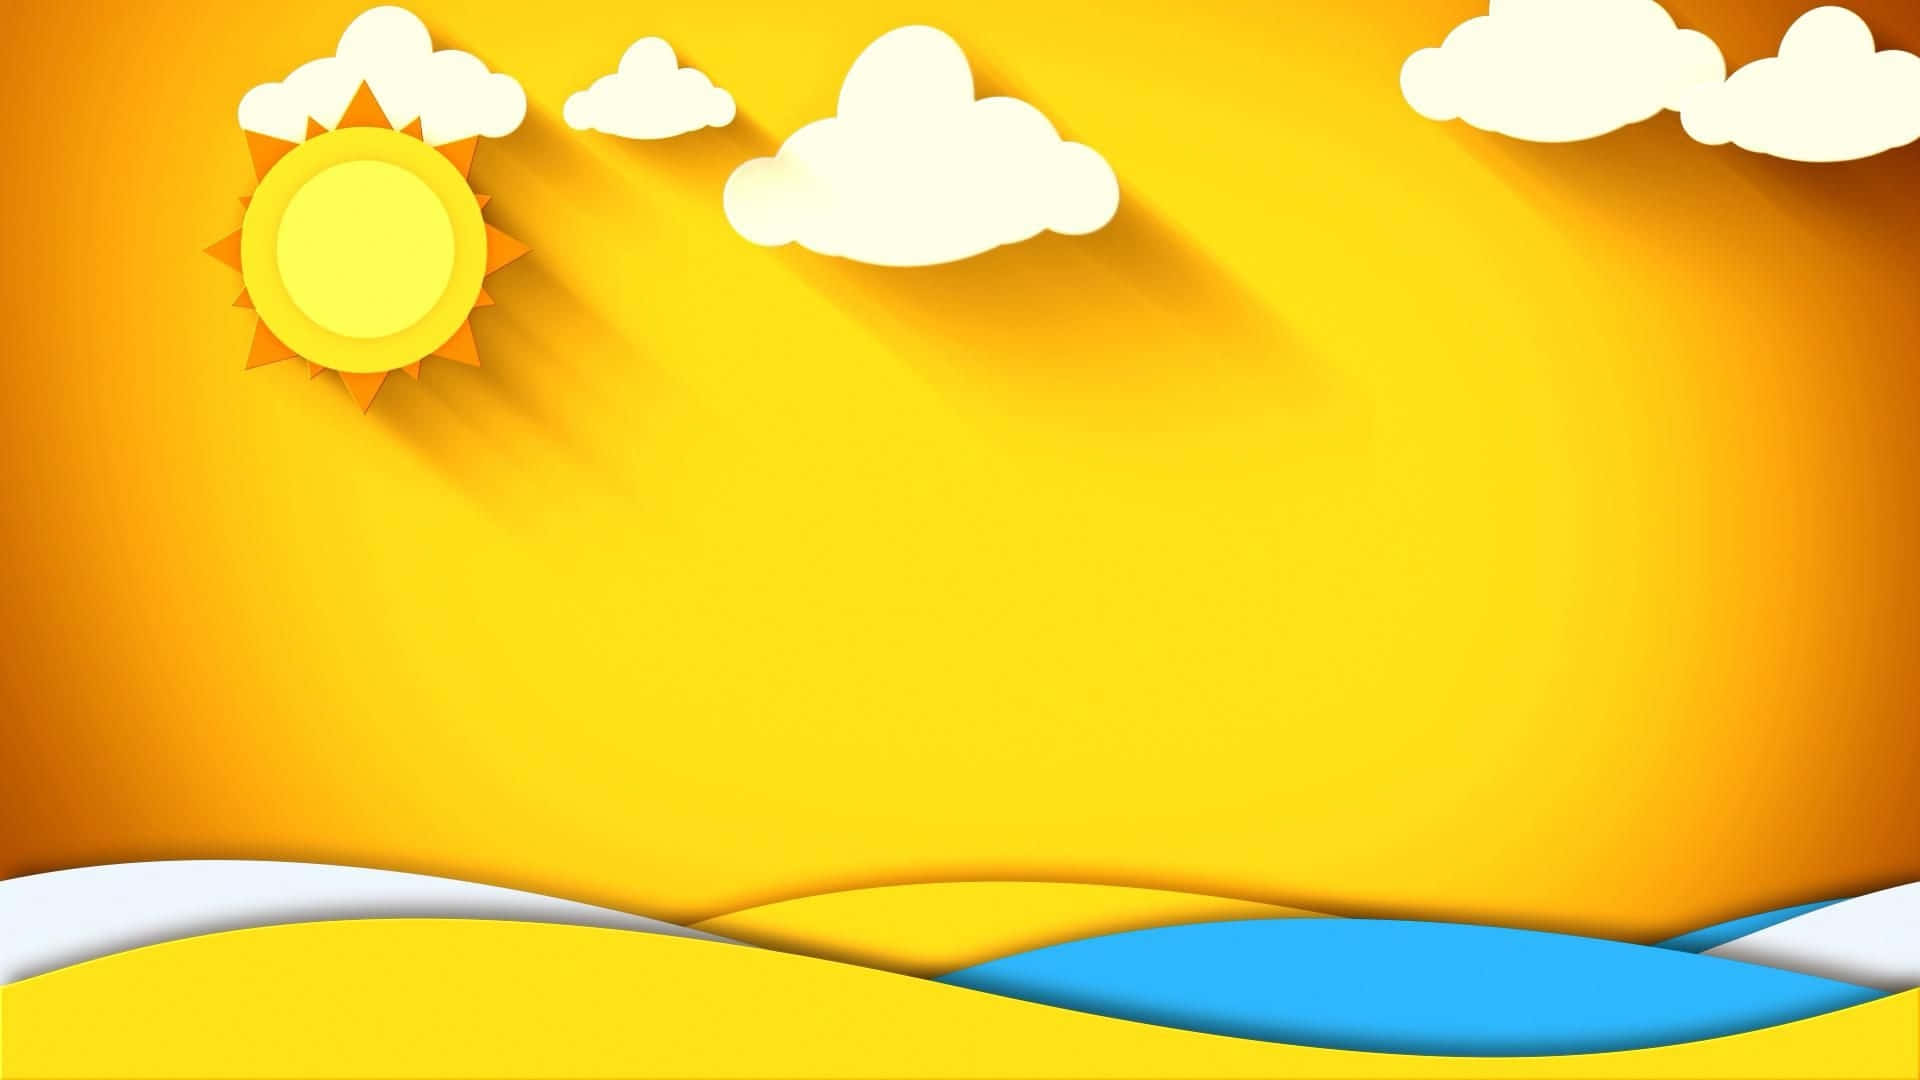 Soar Through the Clouds with a Summer Zoom Virtual Background